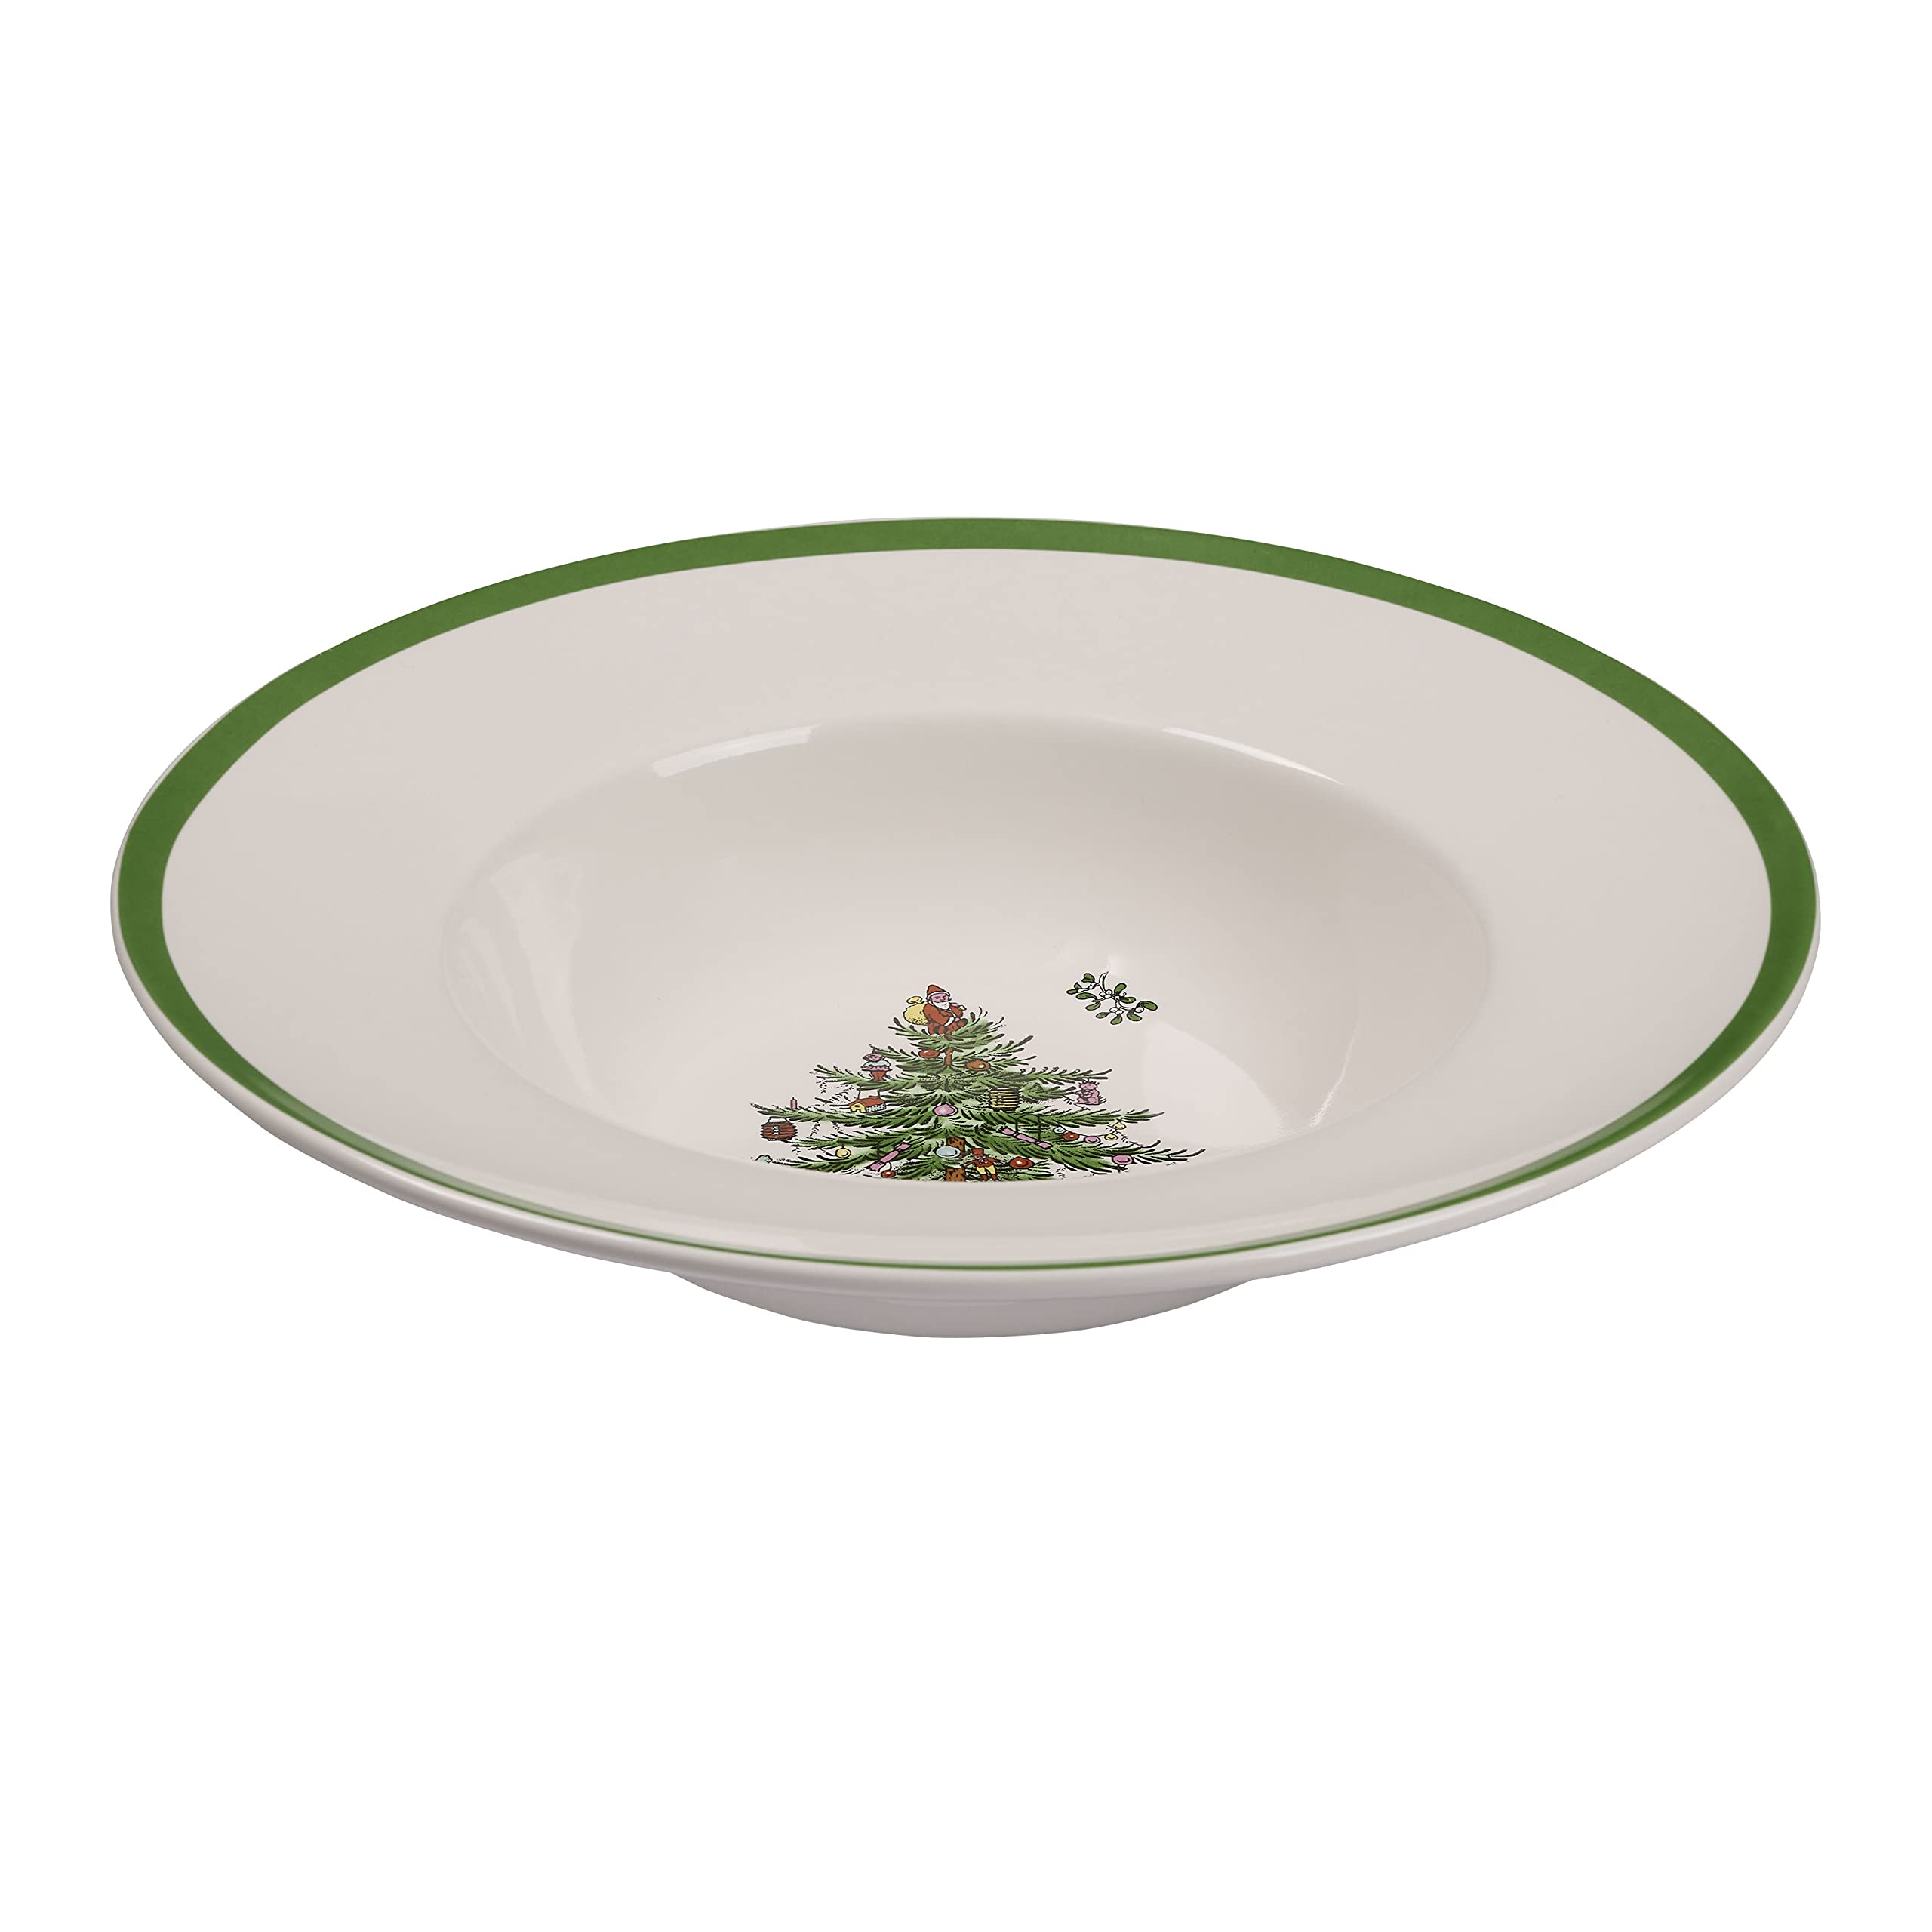 Spode - Christmas Tree Collection - 10" Pasta Bowl - Made of Porcelain- Rimmed Plate for Serving Salad, Spaghetti, and Soup- Dis